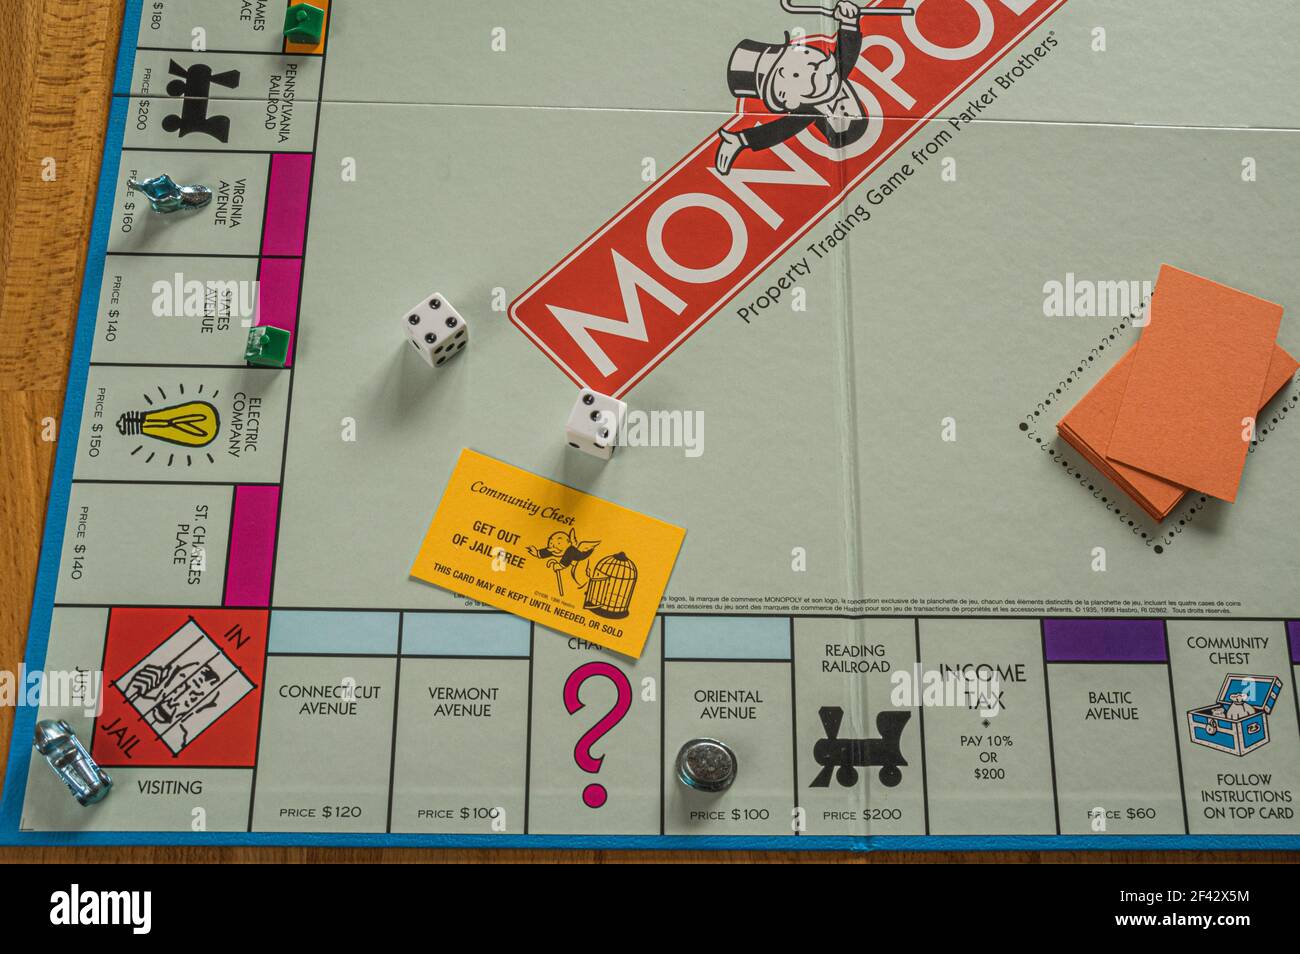 Monopoly board showing Get Out of Jail Free card along with dice Stock Photo